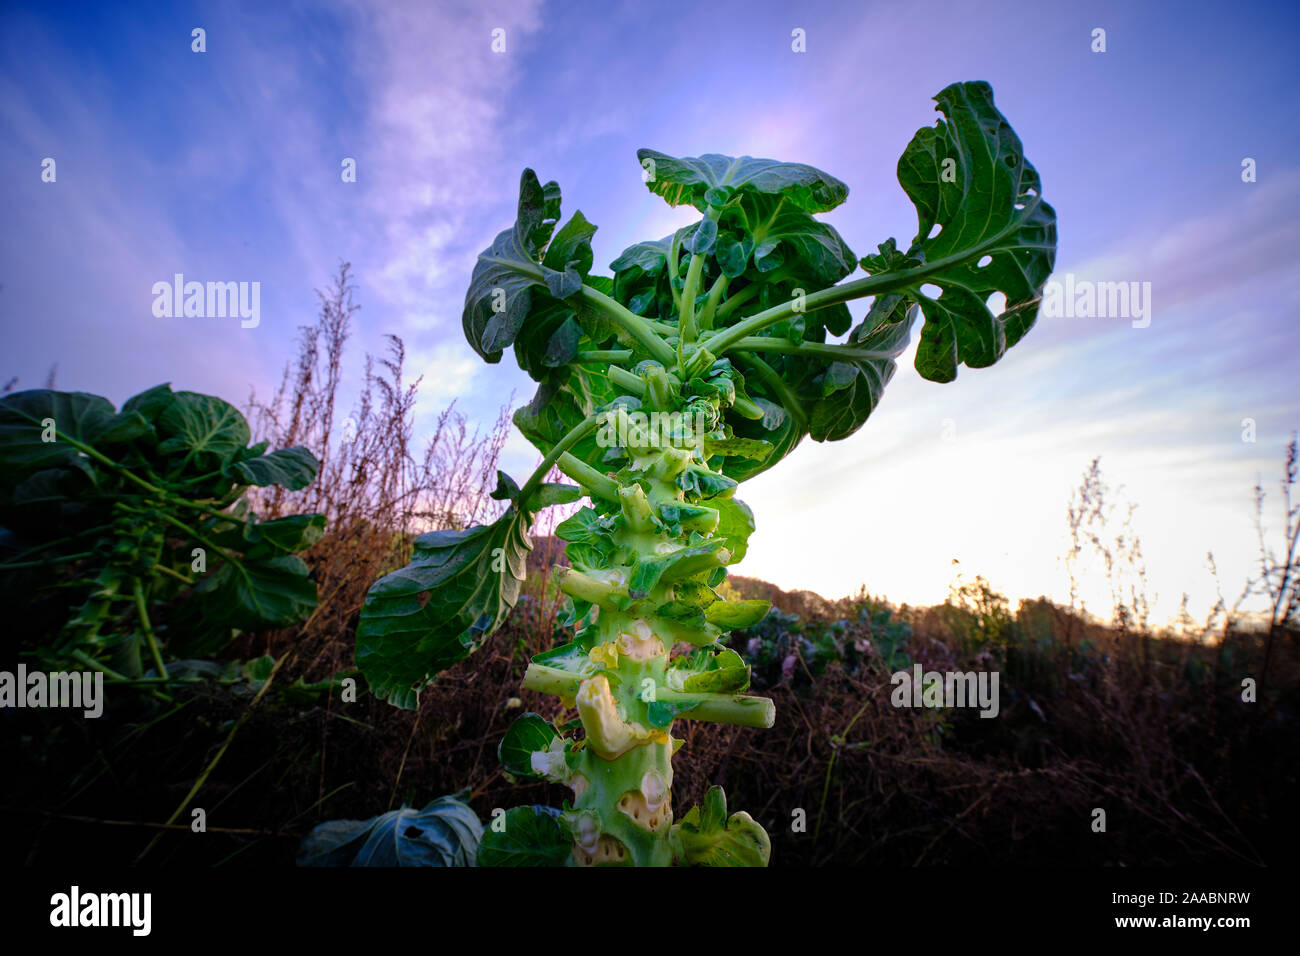 Partly harvested brussels sprouts plant in a non industrial, organic garden in fron of the blue sky Stock Photo